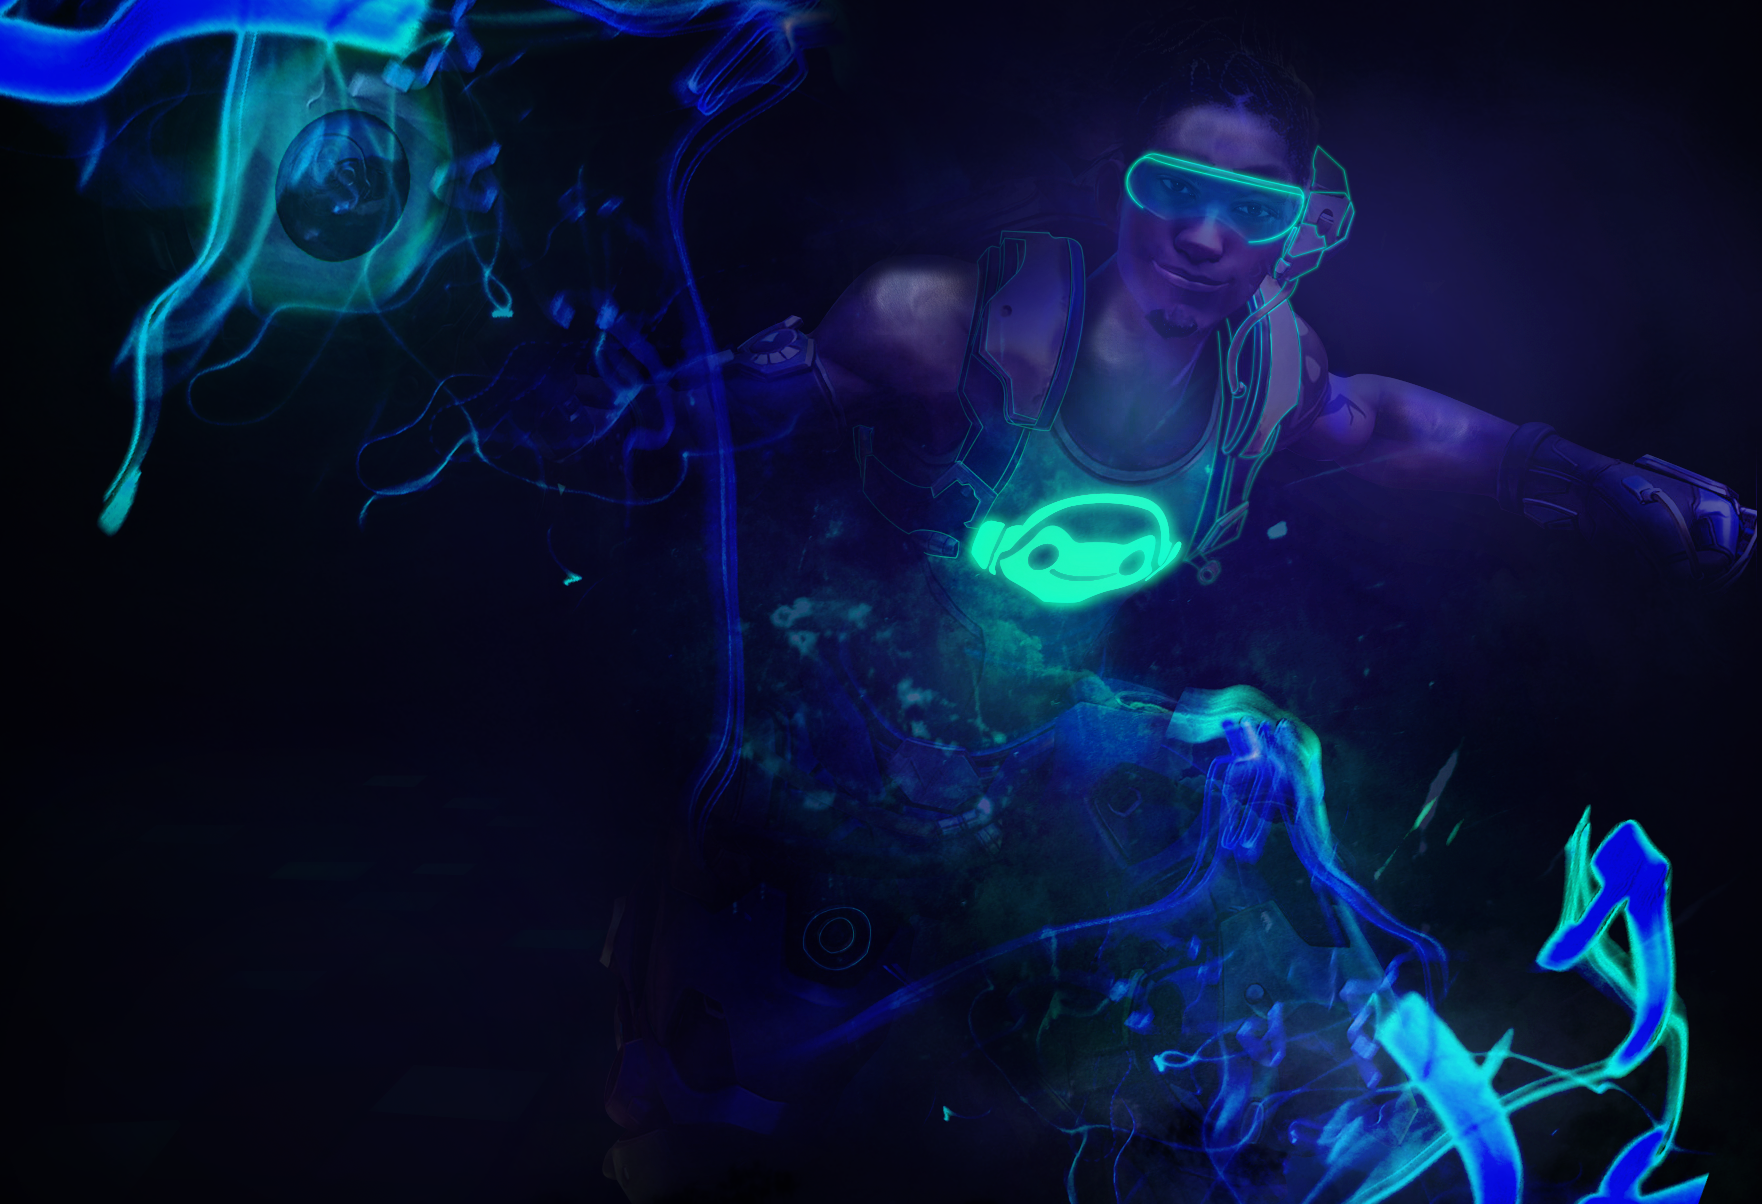 Lucio Hd Wallpapers